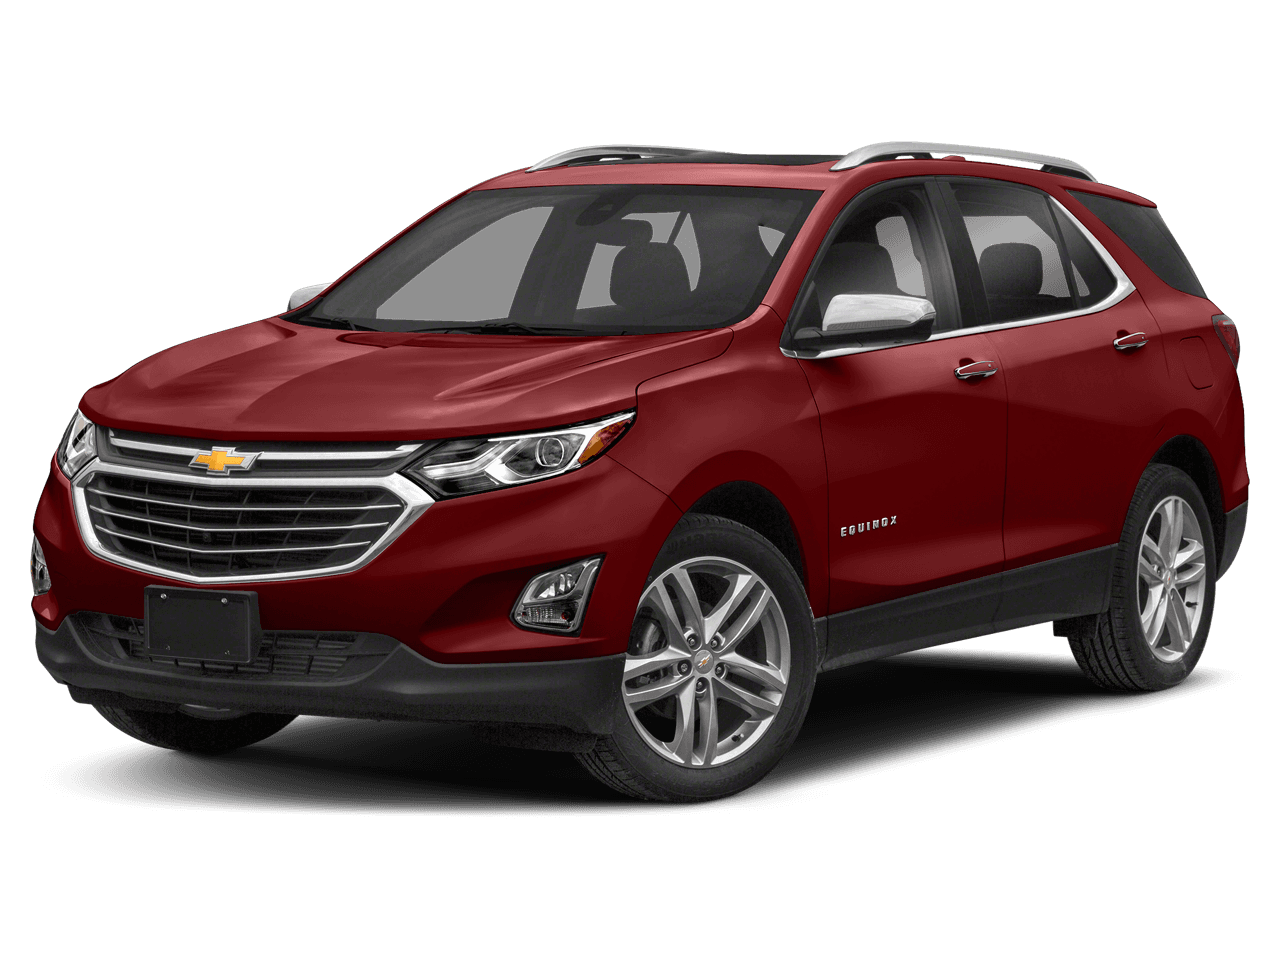 2021 Chevrolet Equinox Photo in Wooster, OH 44691